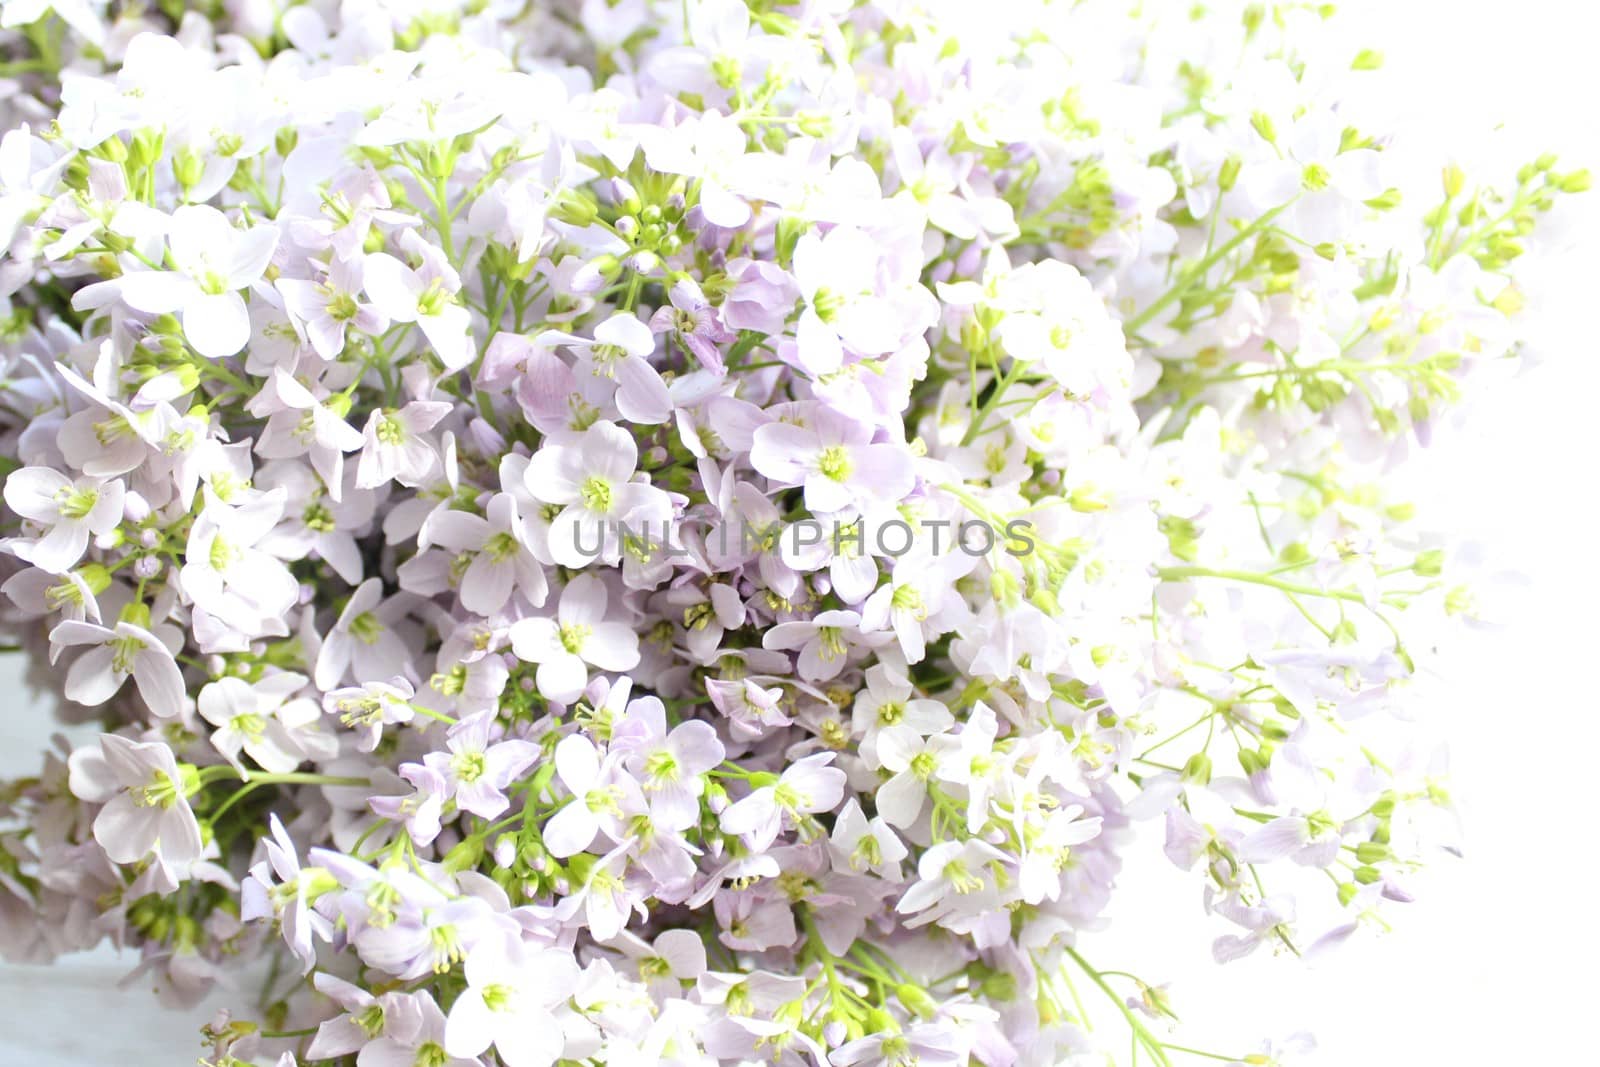 The picture shows many cuckoo flowers on white wooden boards.